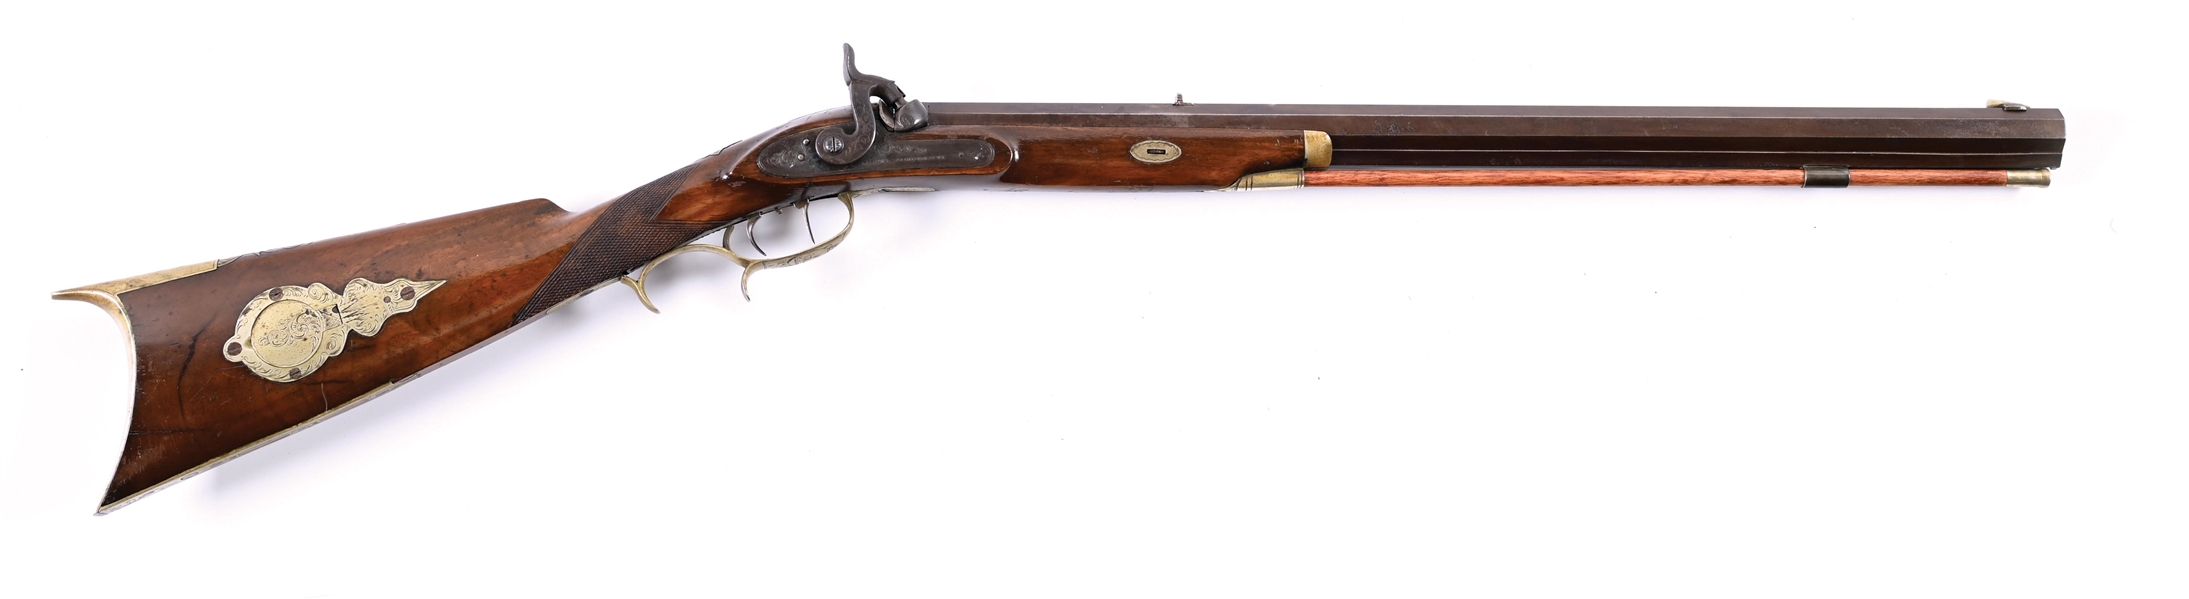 (A) J. G. SYMS HALF STOCK PERCUSSION RIFLE.